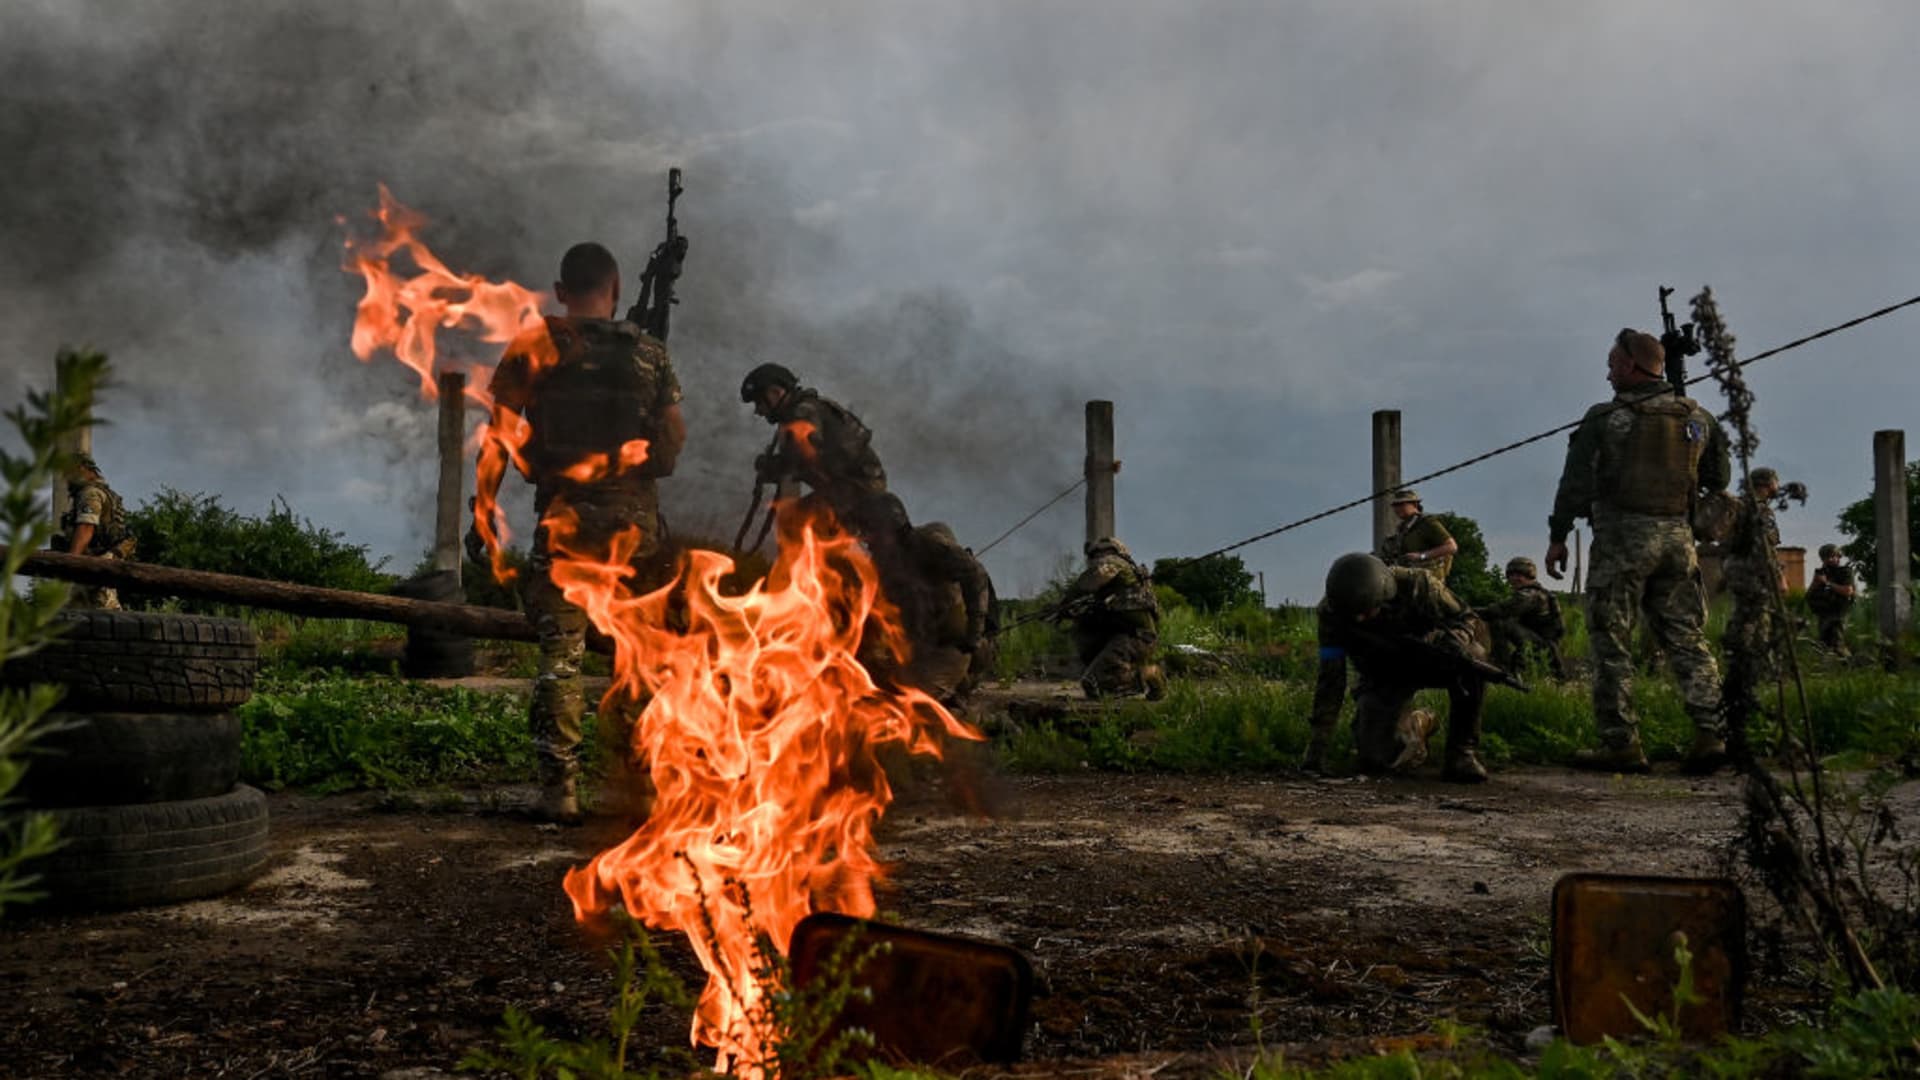 ZAPORIZHZHIA REGION, UKRAINE - JUNE 30, 2023 - Servicemen of the 128th separate mountain assault brigade pass a special obstacle course as part of the exam to receive a mountain assault beret. (Photo credit should read Dmytro Smoliyenko / Ukrinform/Future Publishing via Getty Images)